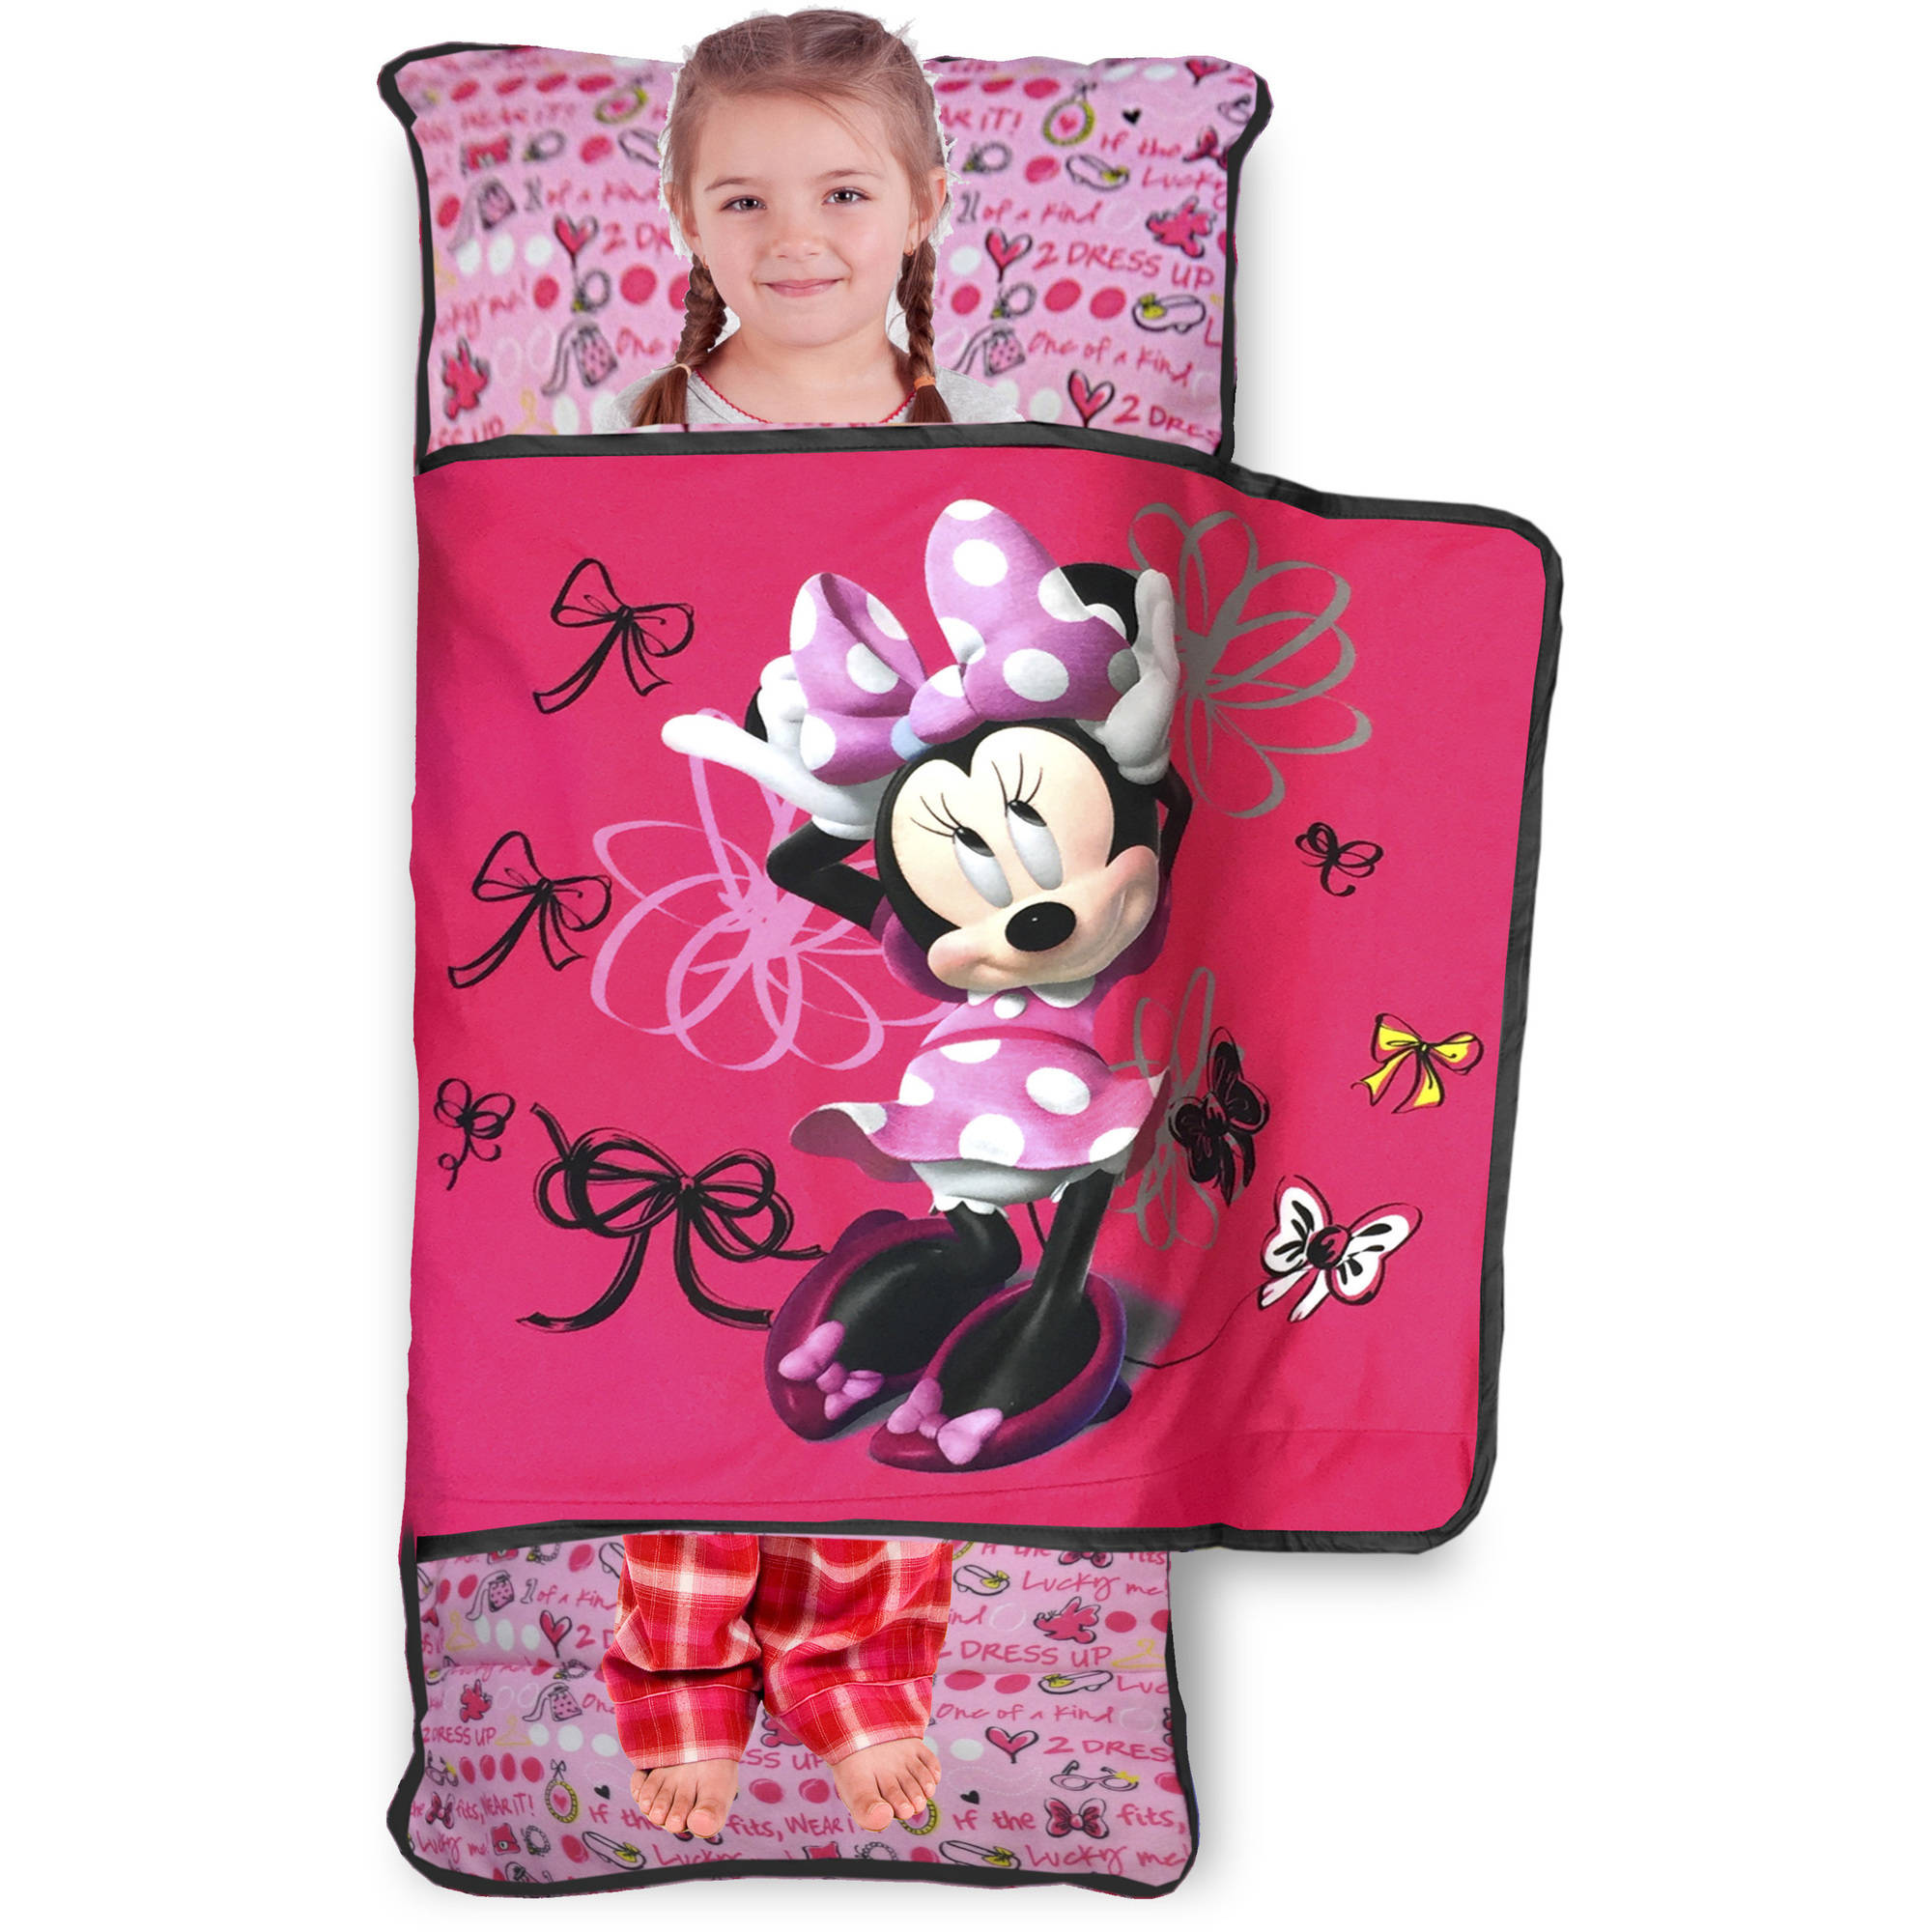 Disney Minnie Mouse Inflatable Nap Mat Available - image 2 of 2